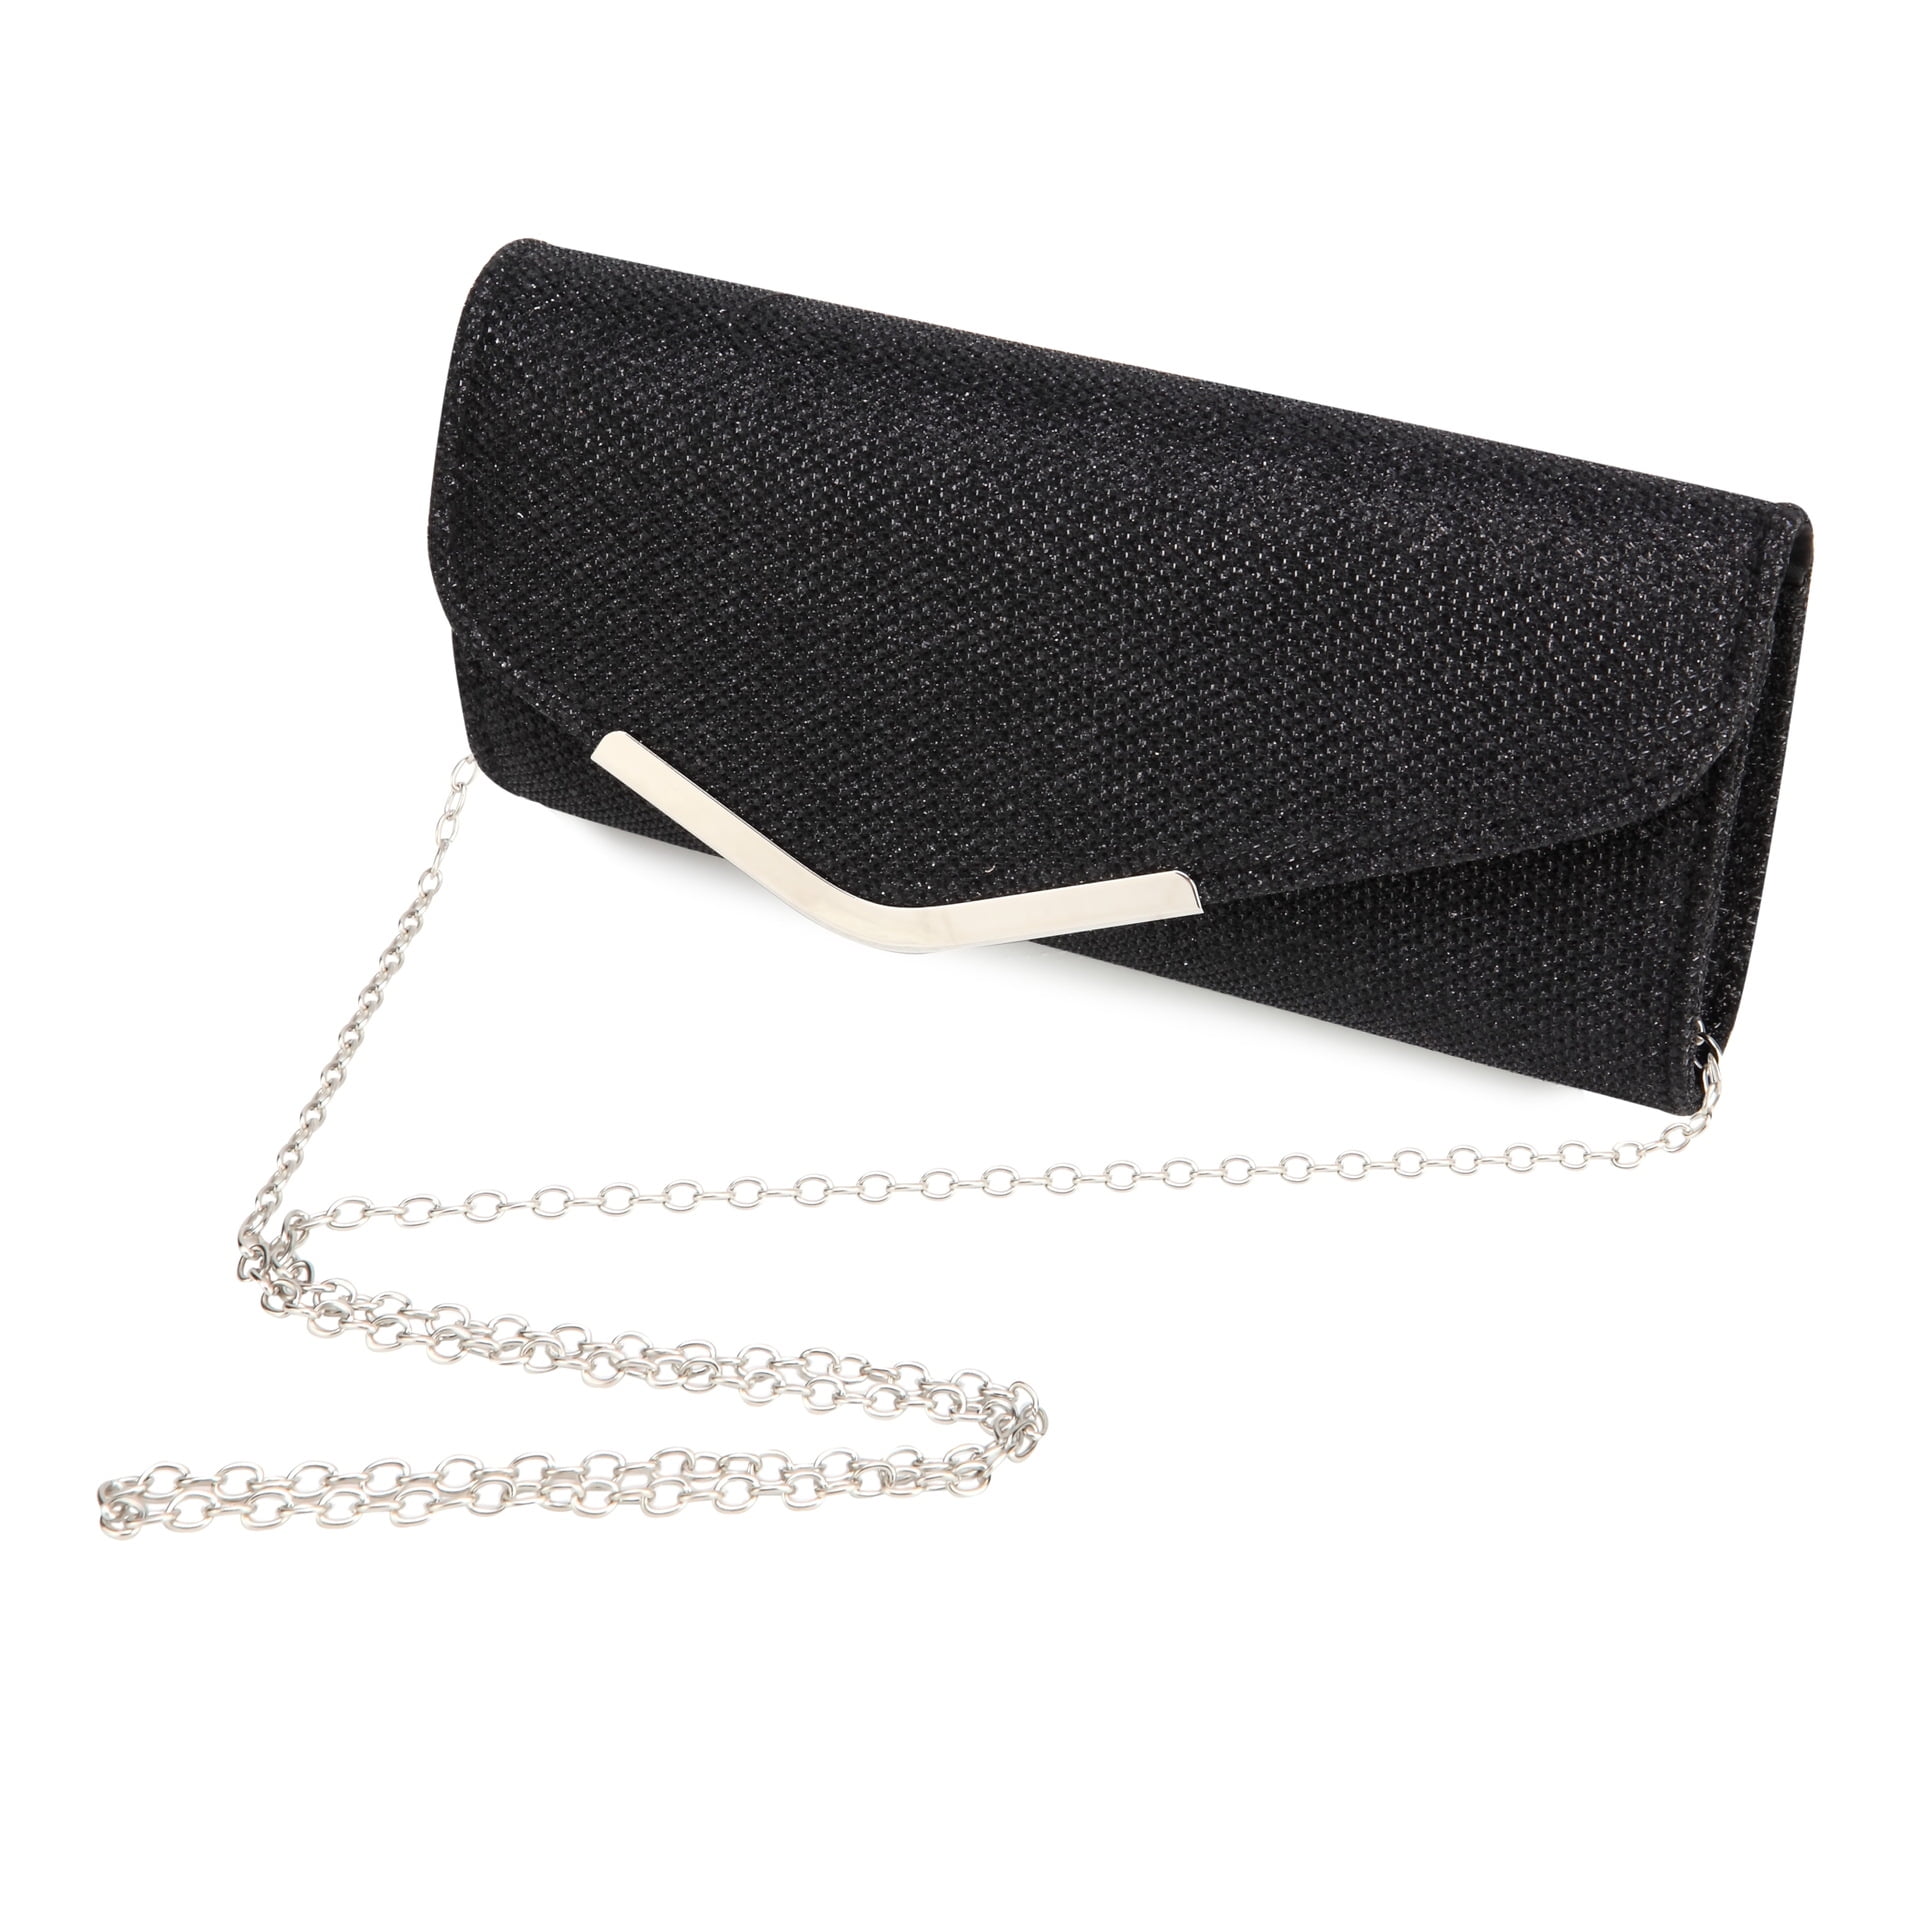 Pinfect Vintage Clutch Purse Chains Satin Beading Party Handbag Handmade  for Bride Party - Walmart.com